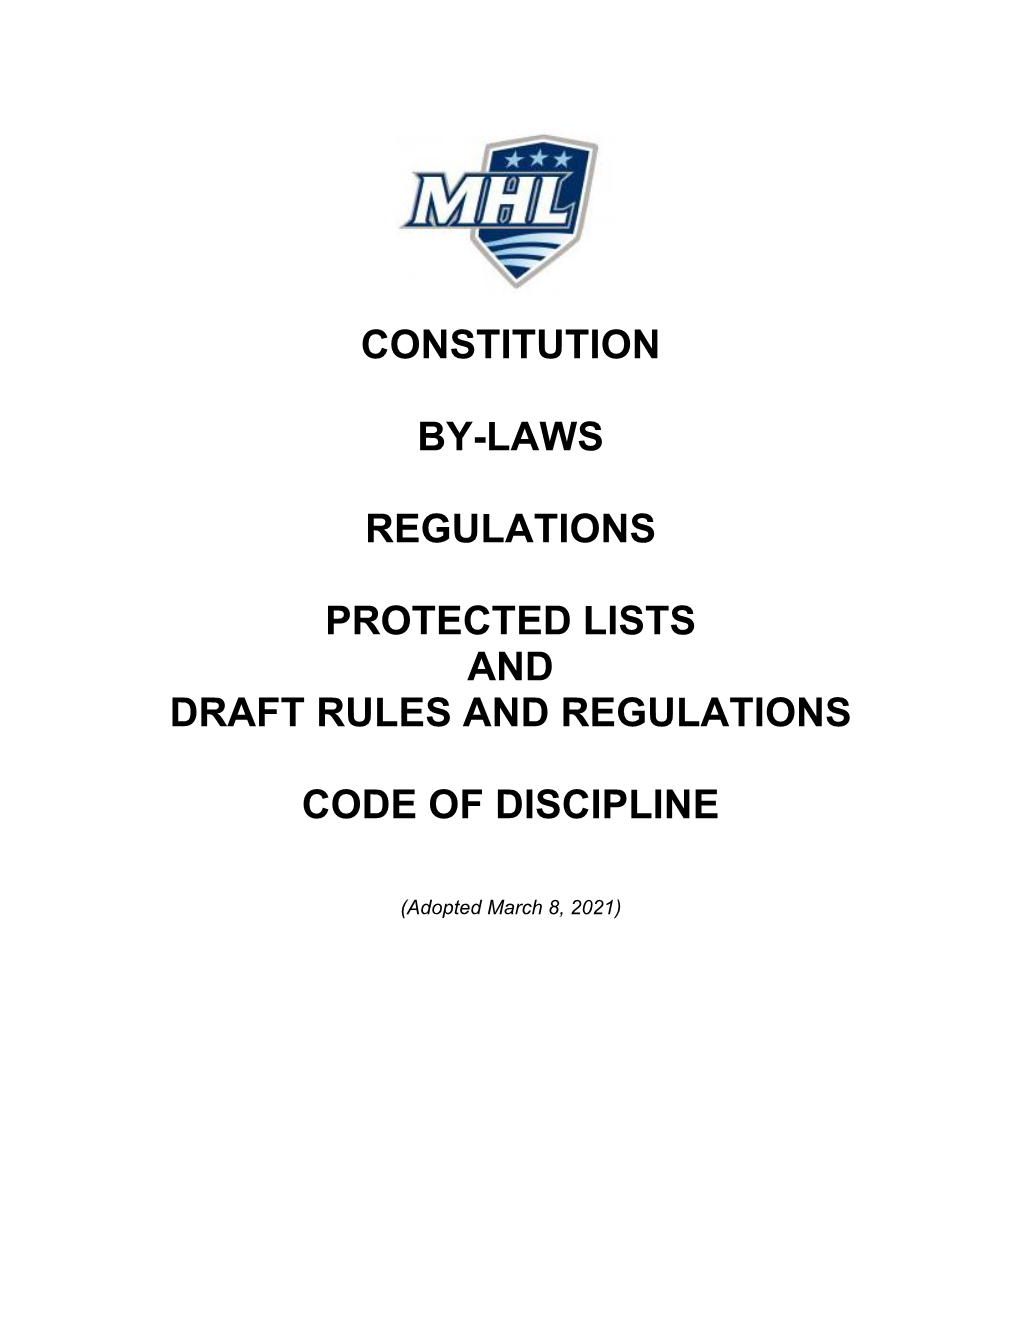 Constitution By-Laws Regulations Protected Lists and Draft Rules And